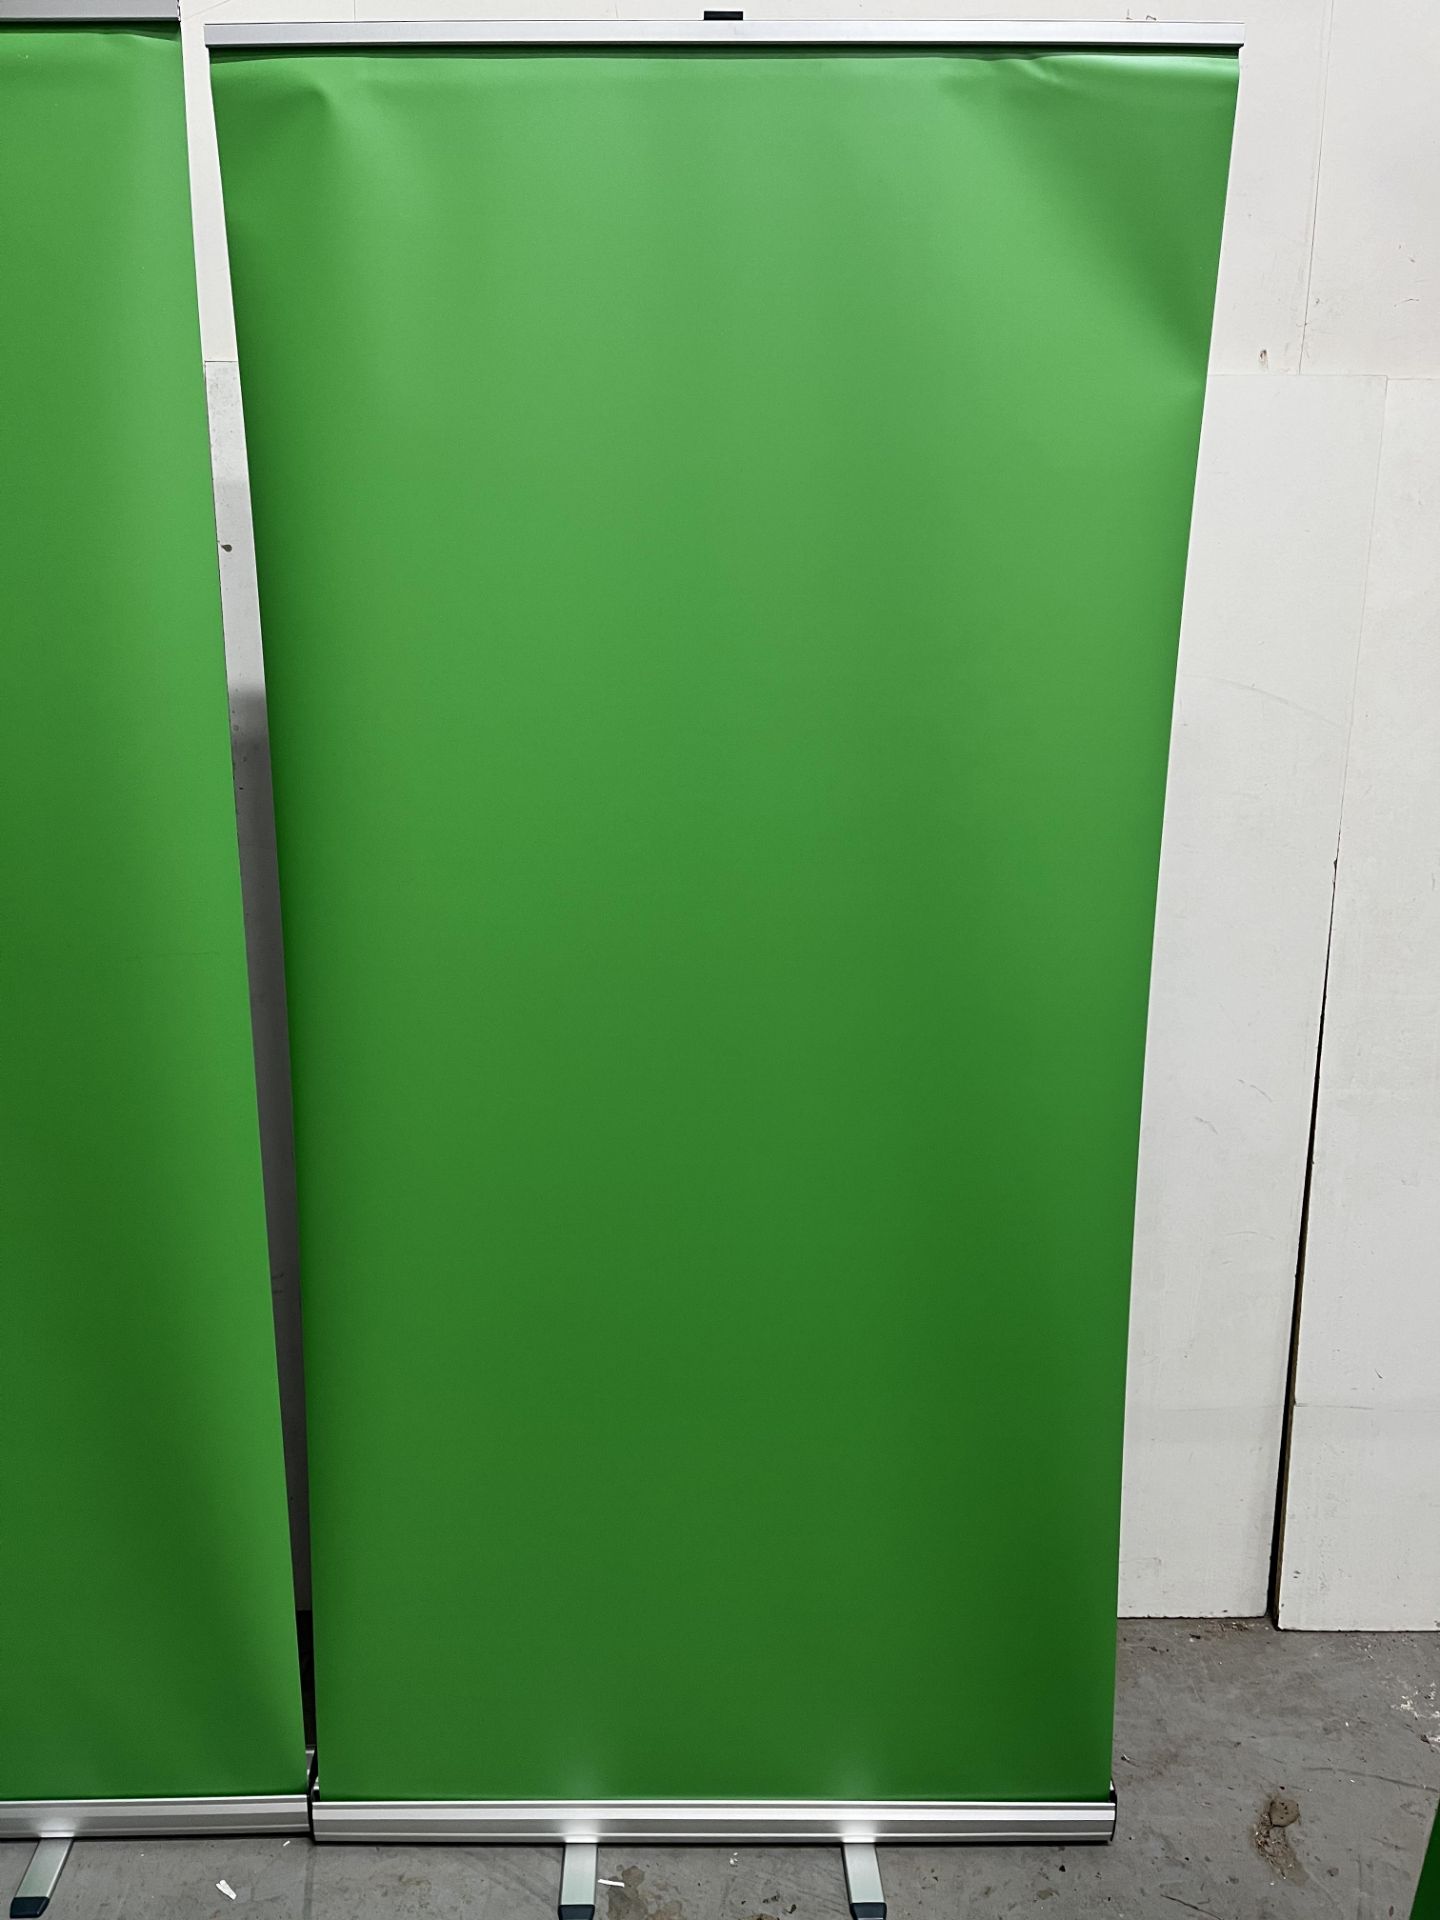 3 x Collapsable Green Screens - As pictured - Image 4 of 10